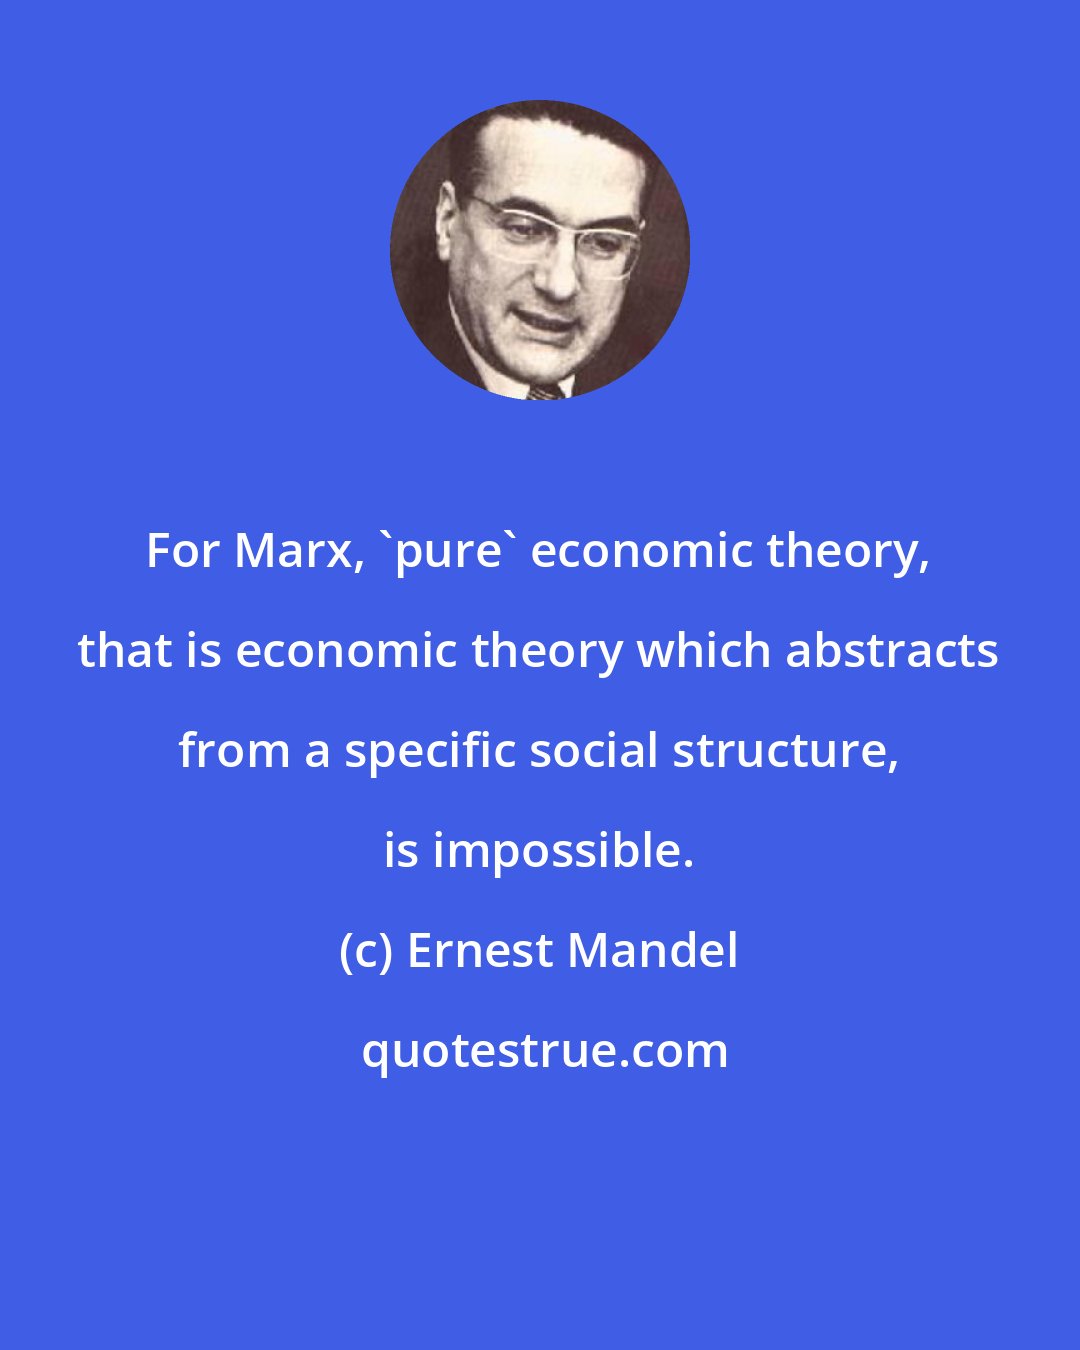 Ernest Mandel: For Marx, 'pure' economic theory, that is economic theory which abstracts from a specific social structure, is impossible.